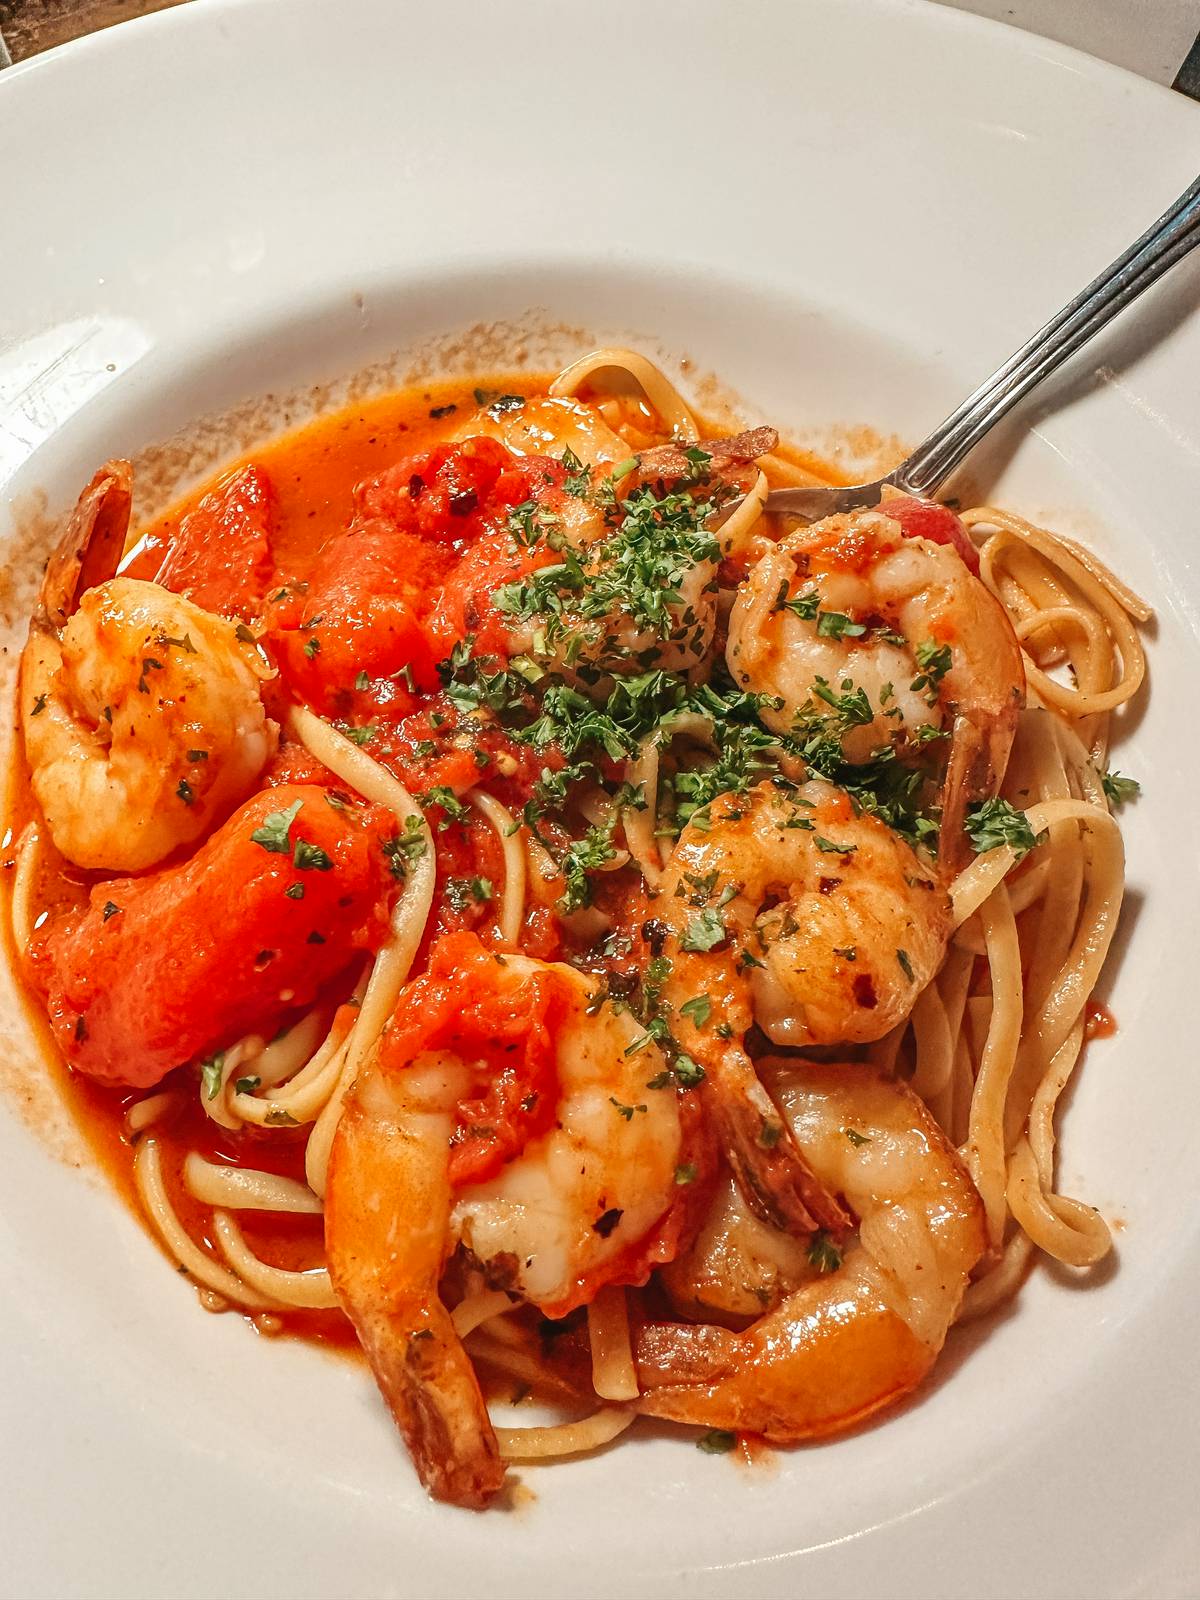 Shrimp pasta from Mimmos 30A